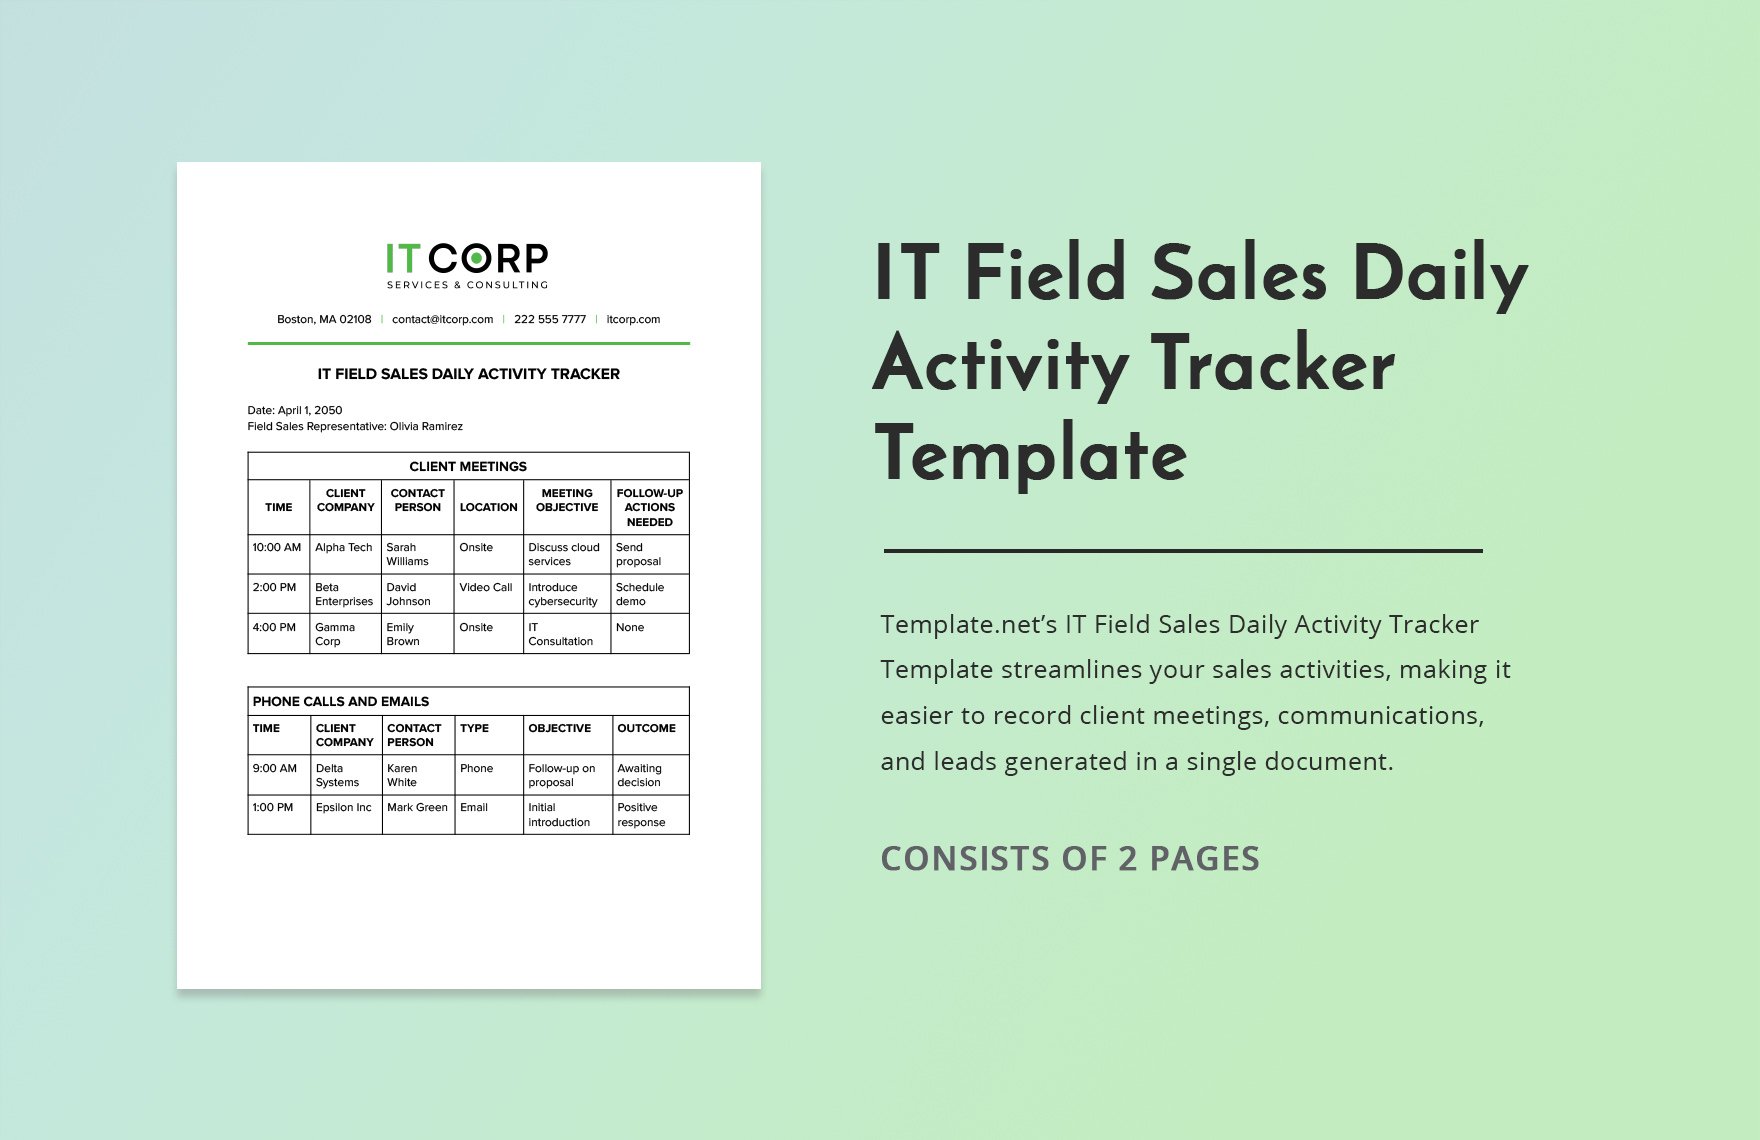 IT Field Sales Daily Activity Tracker Template in Word, Google Docs, PDF